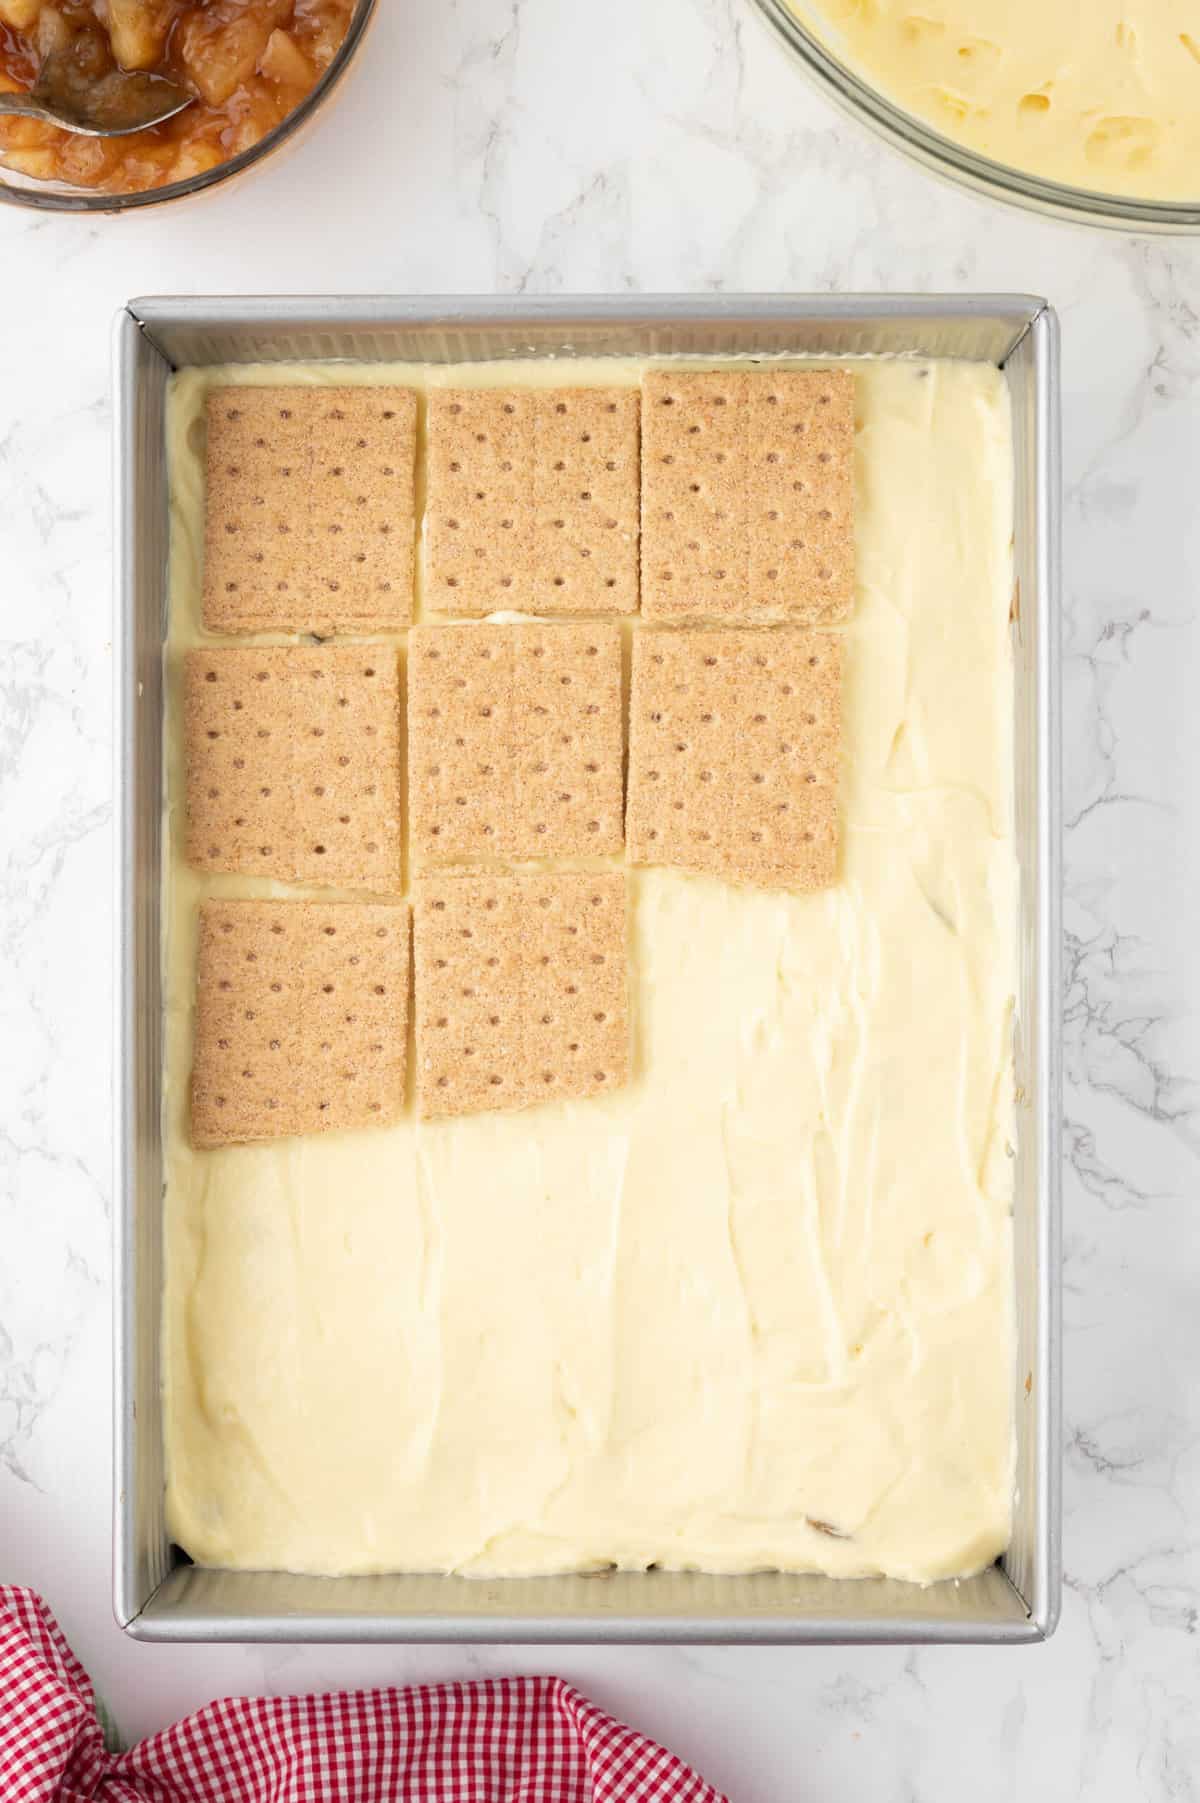 Adding another layer of graham crackers on top of the pudding layer.